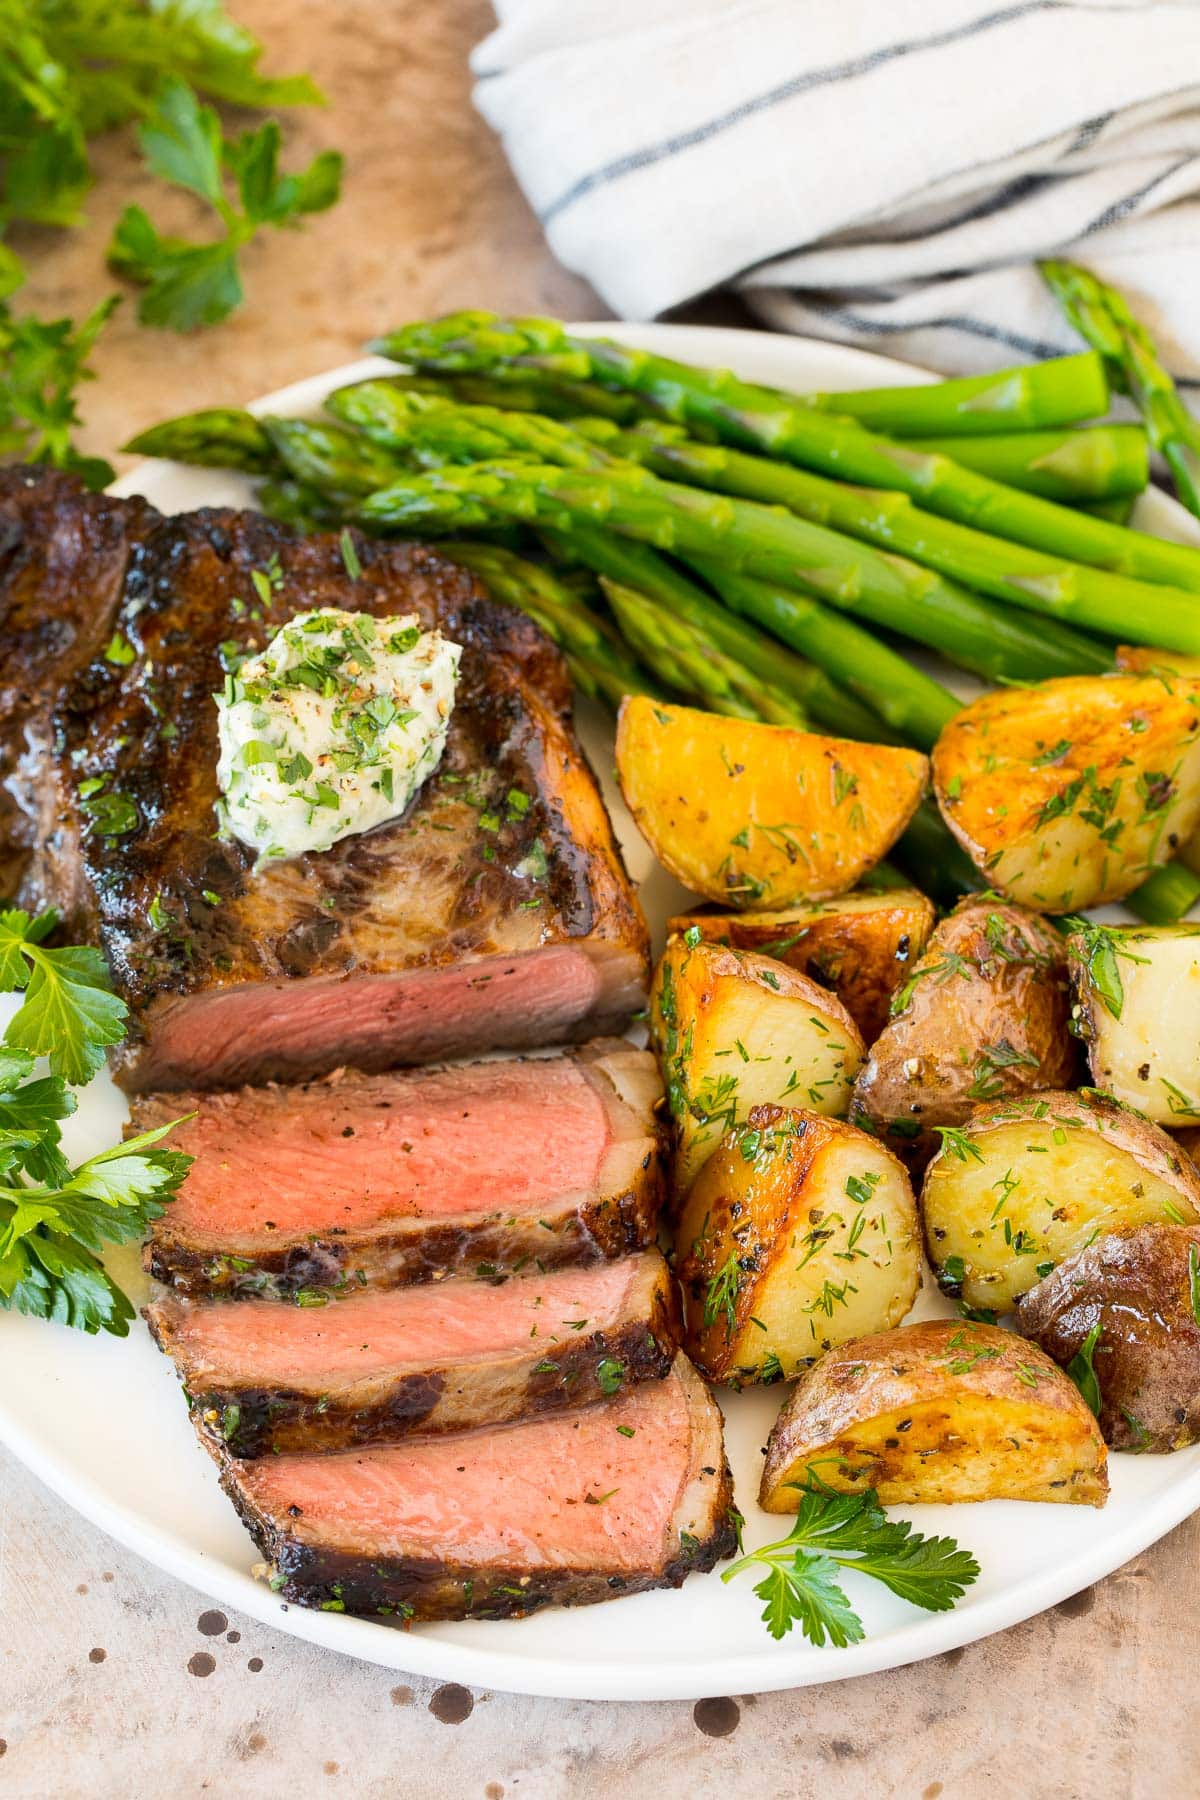 Beef in a steak marinade that's been grilled and sliced and served with potatoes and vegetables.